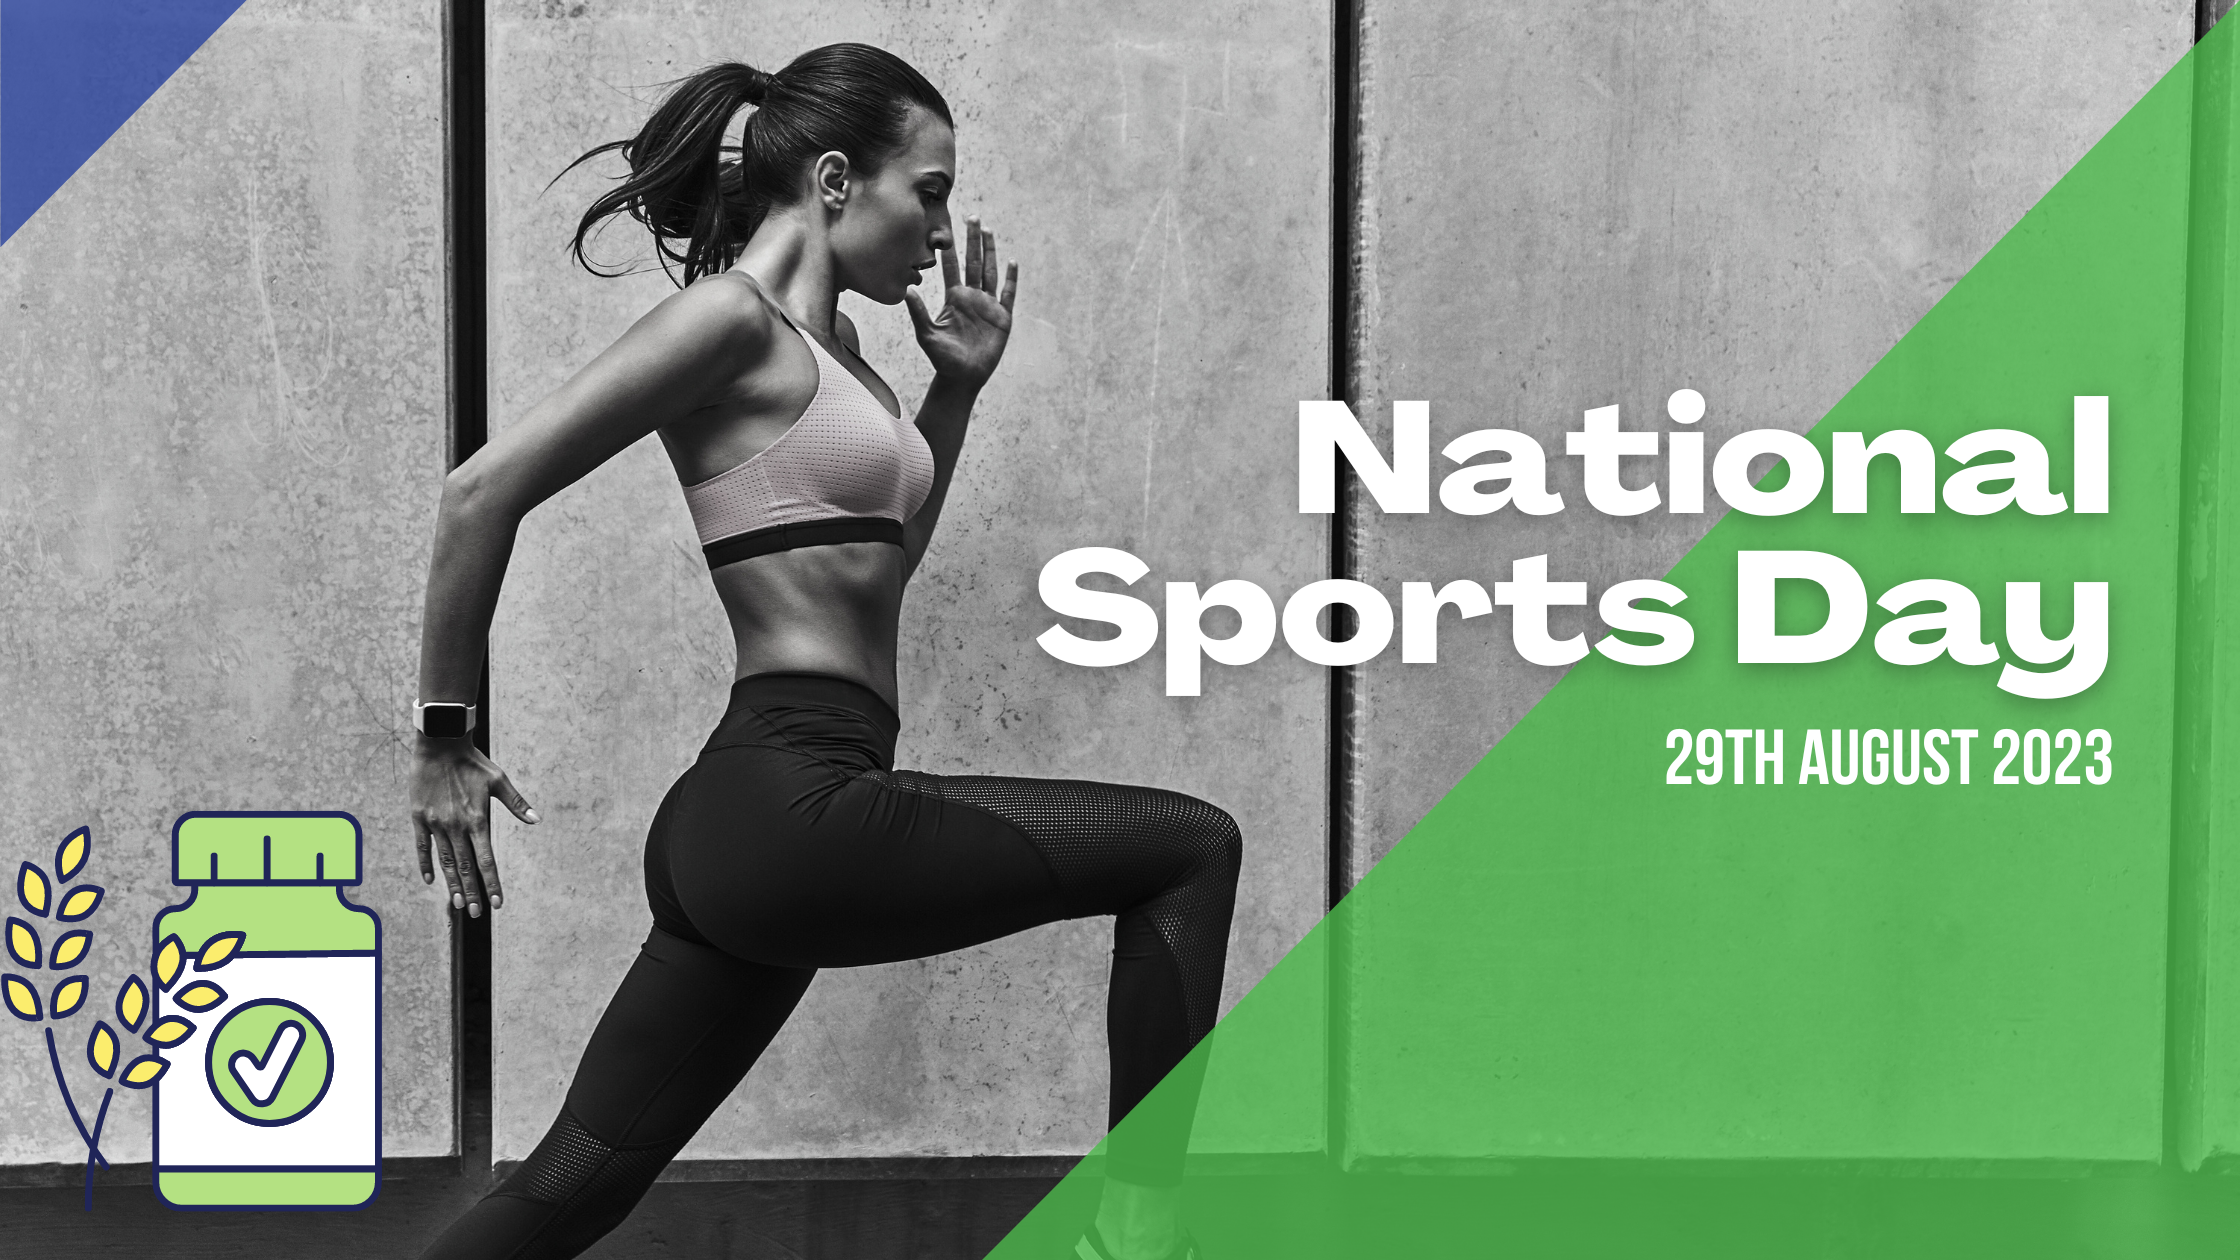 Get Ready to Score Big with Zeon Lifesciences on National Sports Day!